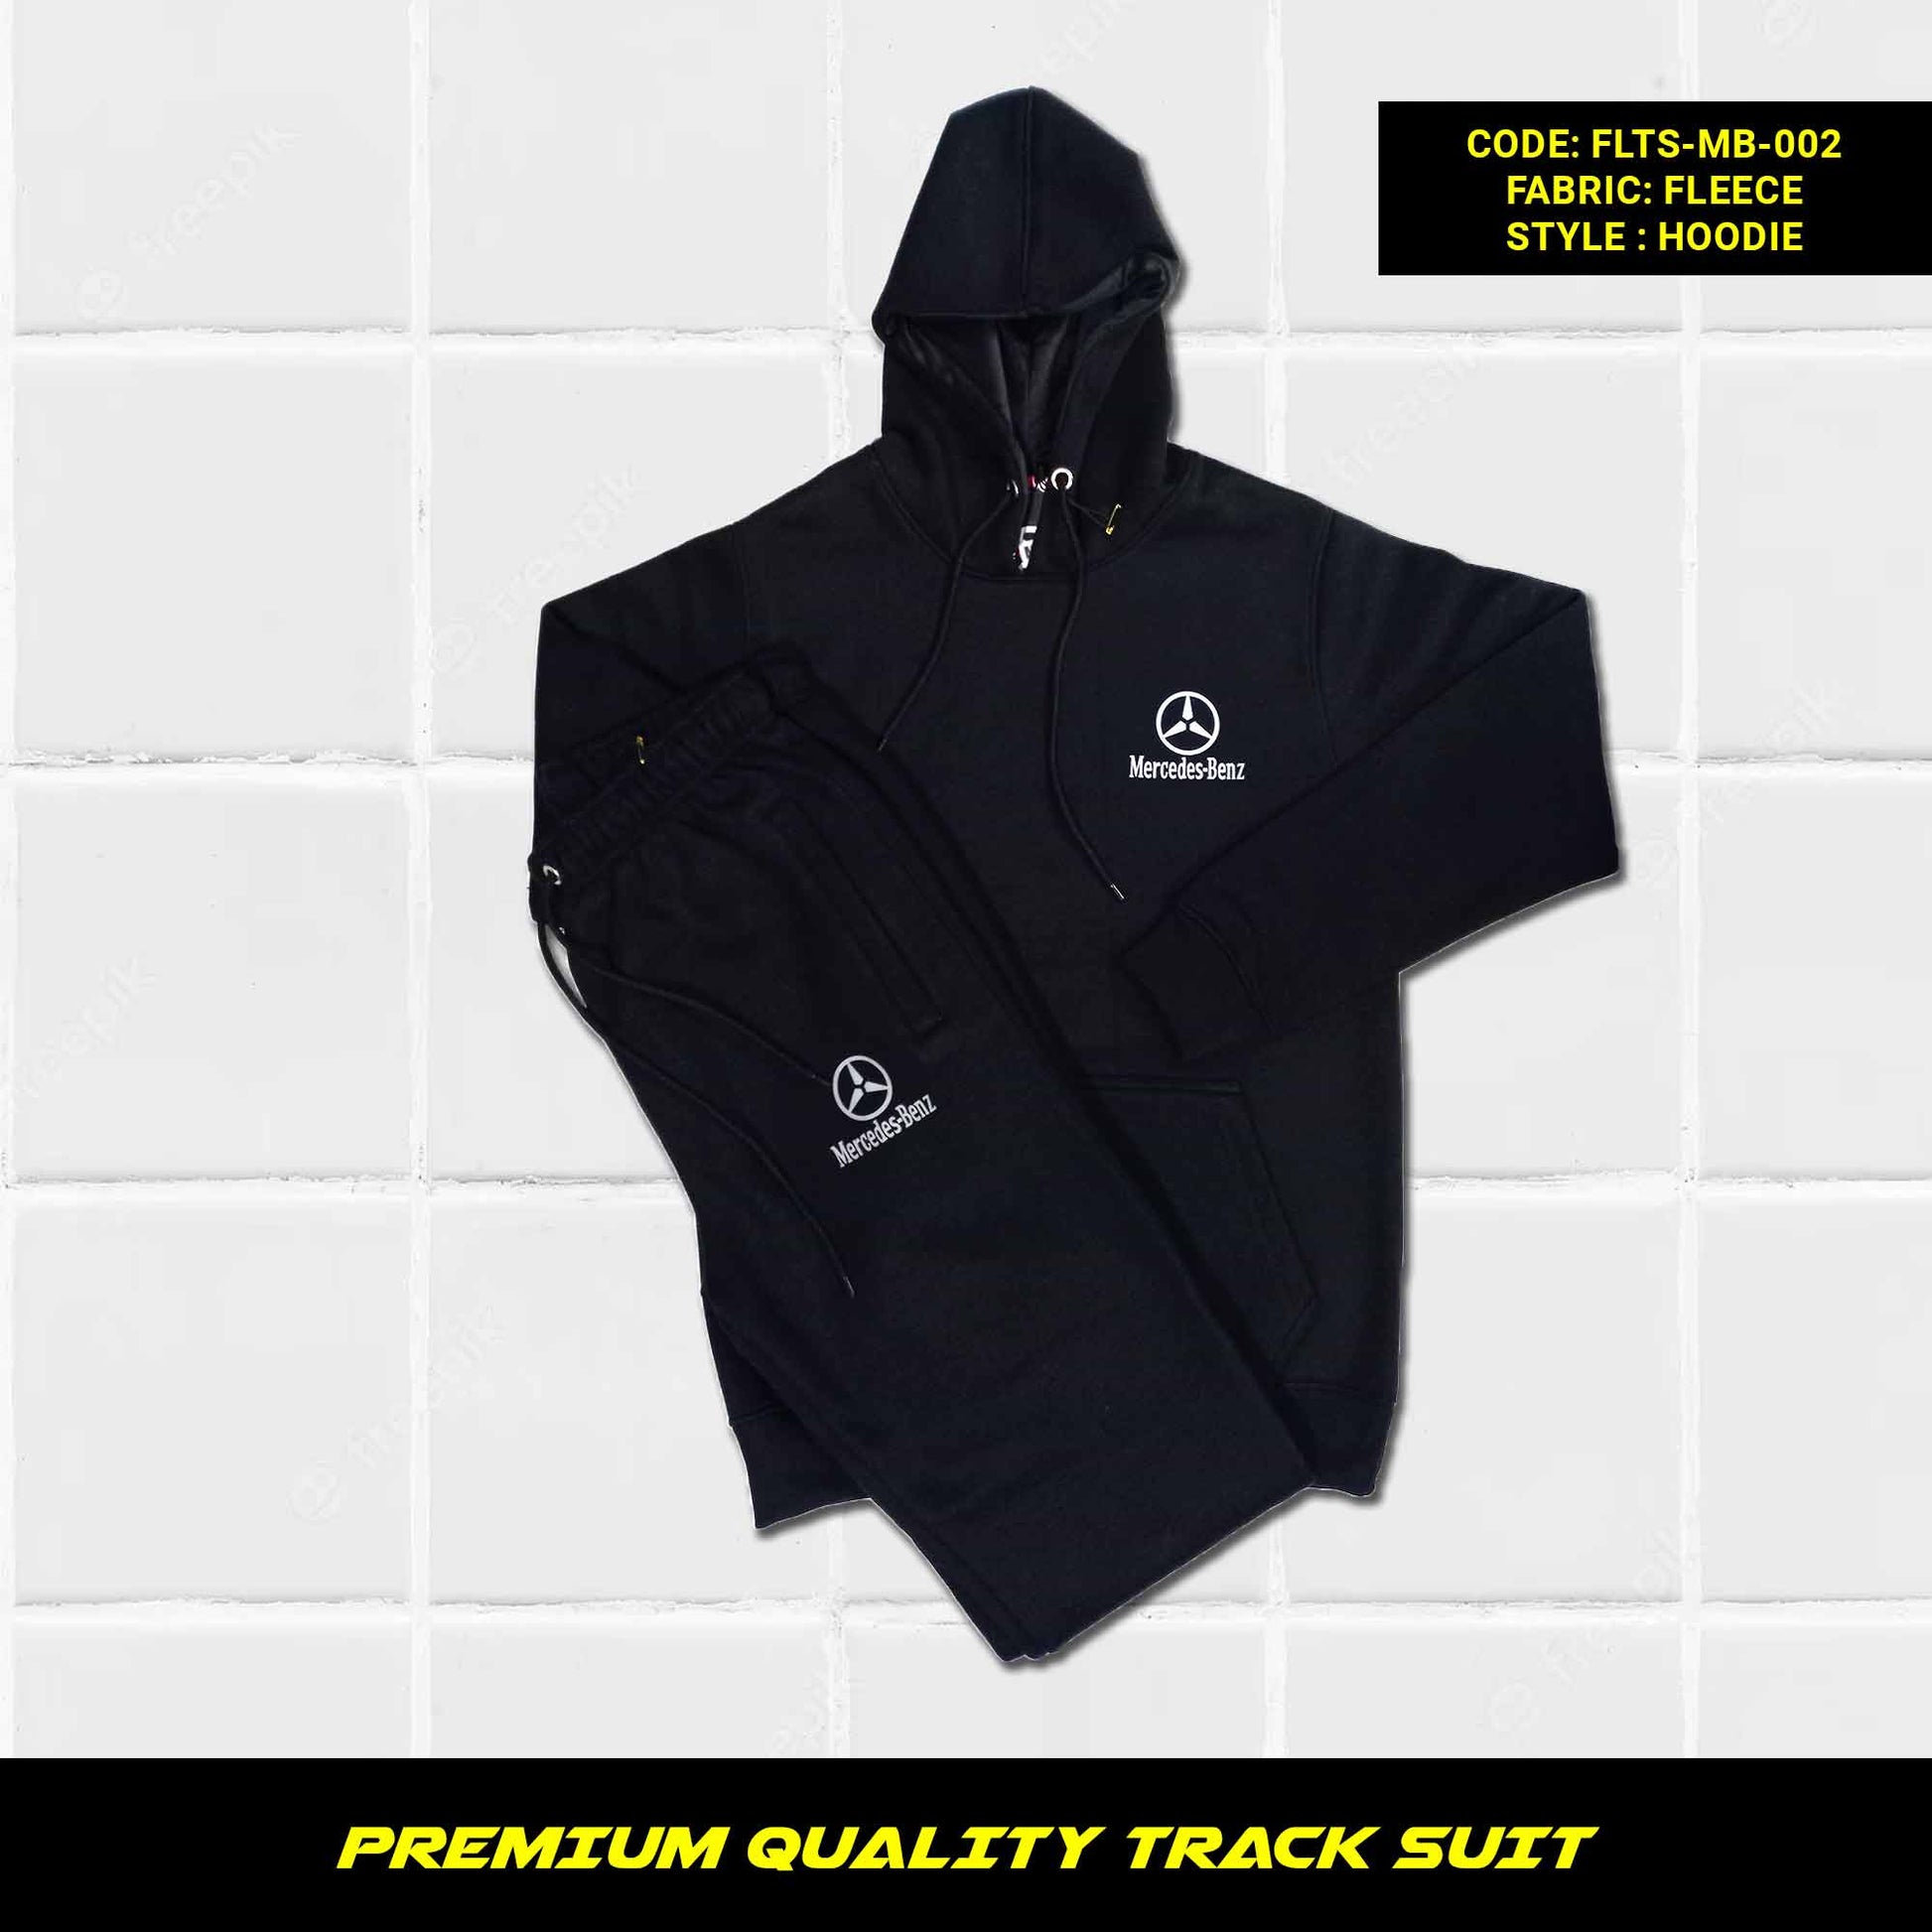 Men's Premium Quality Cotton Fleece Tracksuit for Winter in Pakistan, This men's premium quality cotton fleece tracksuit is perfect for staying warm and comfortable all winter long. It's made from soft and cozy cotton fleece that's 320-325 GSM thick, making it perfect for even the coldest days. The tracksuit features a hoodie with full sleeves and kangaroo pockets, as well as loose-fitting trousers with zippered pockets and a tape to fasten at the waist.